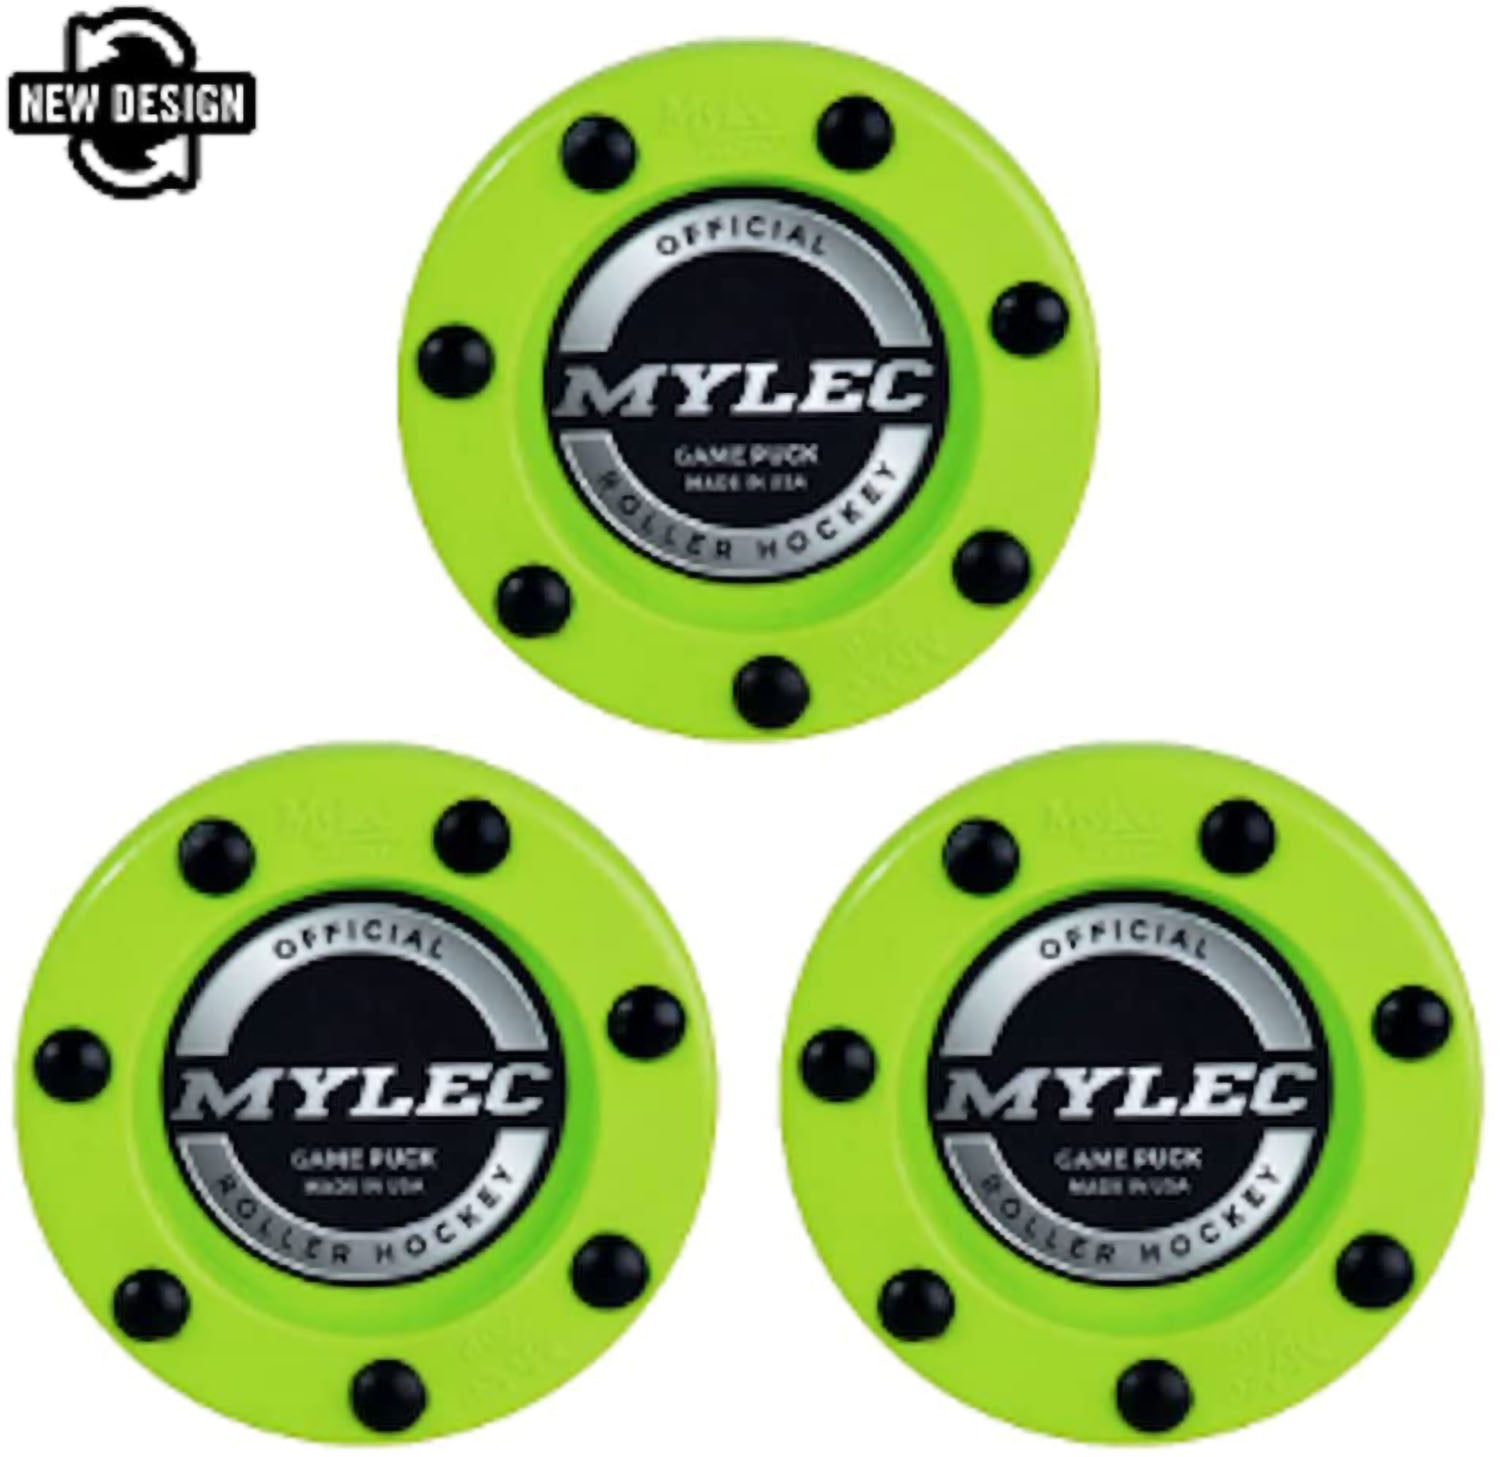 Mylec Green Official Roller Hockey Game Puck - 3 Pack - Pro-Distributing